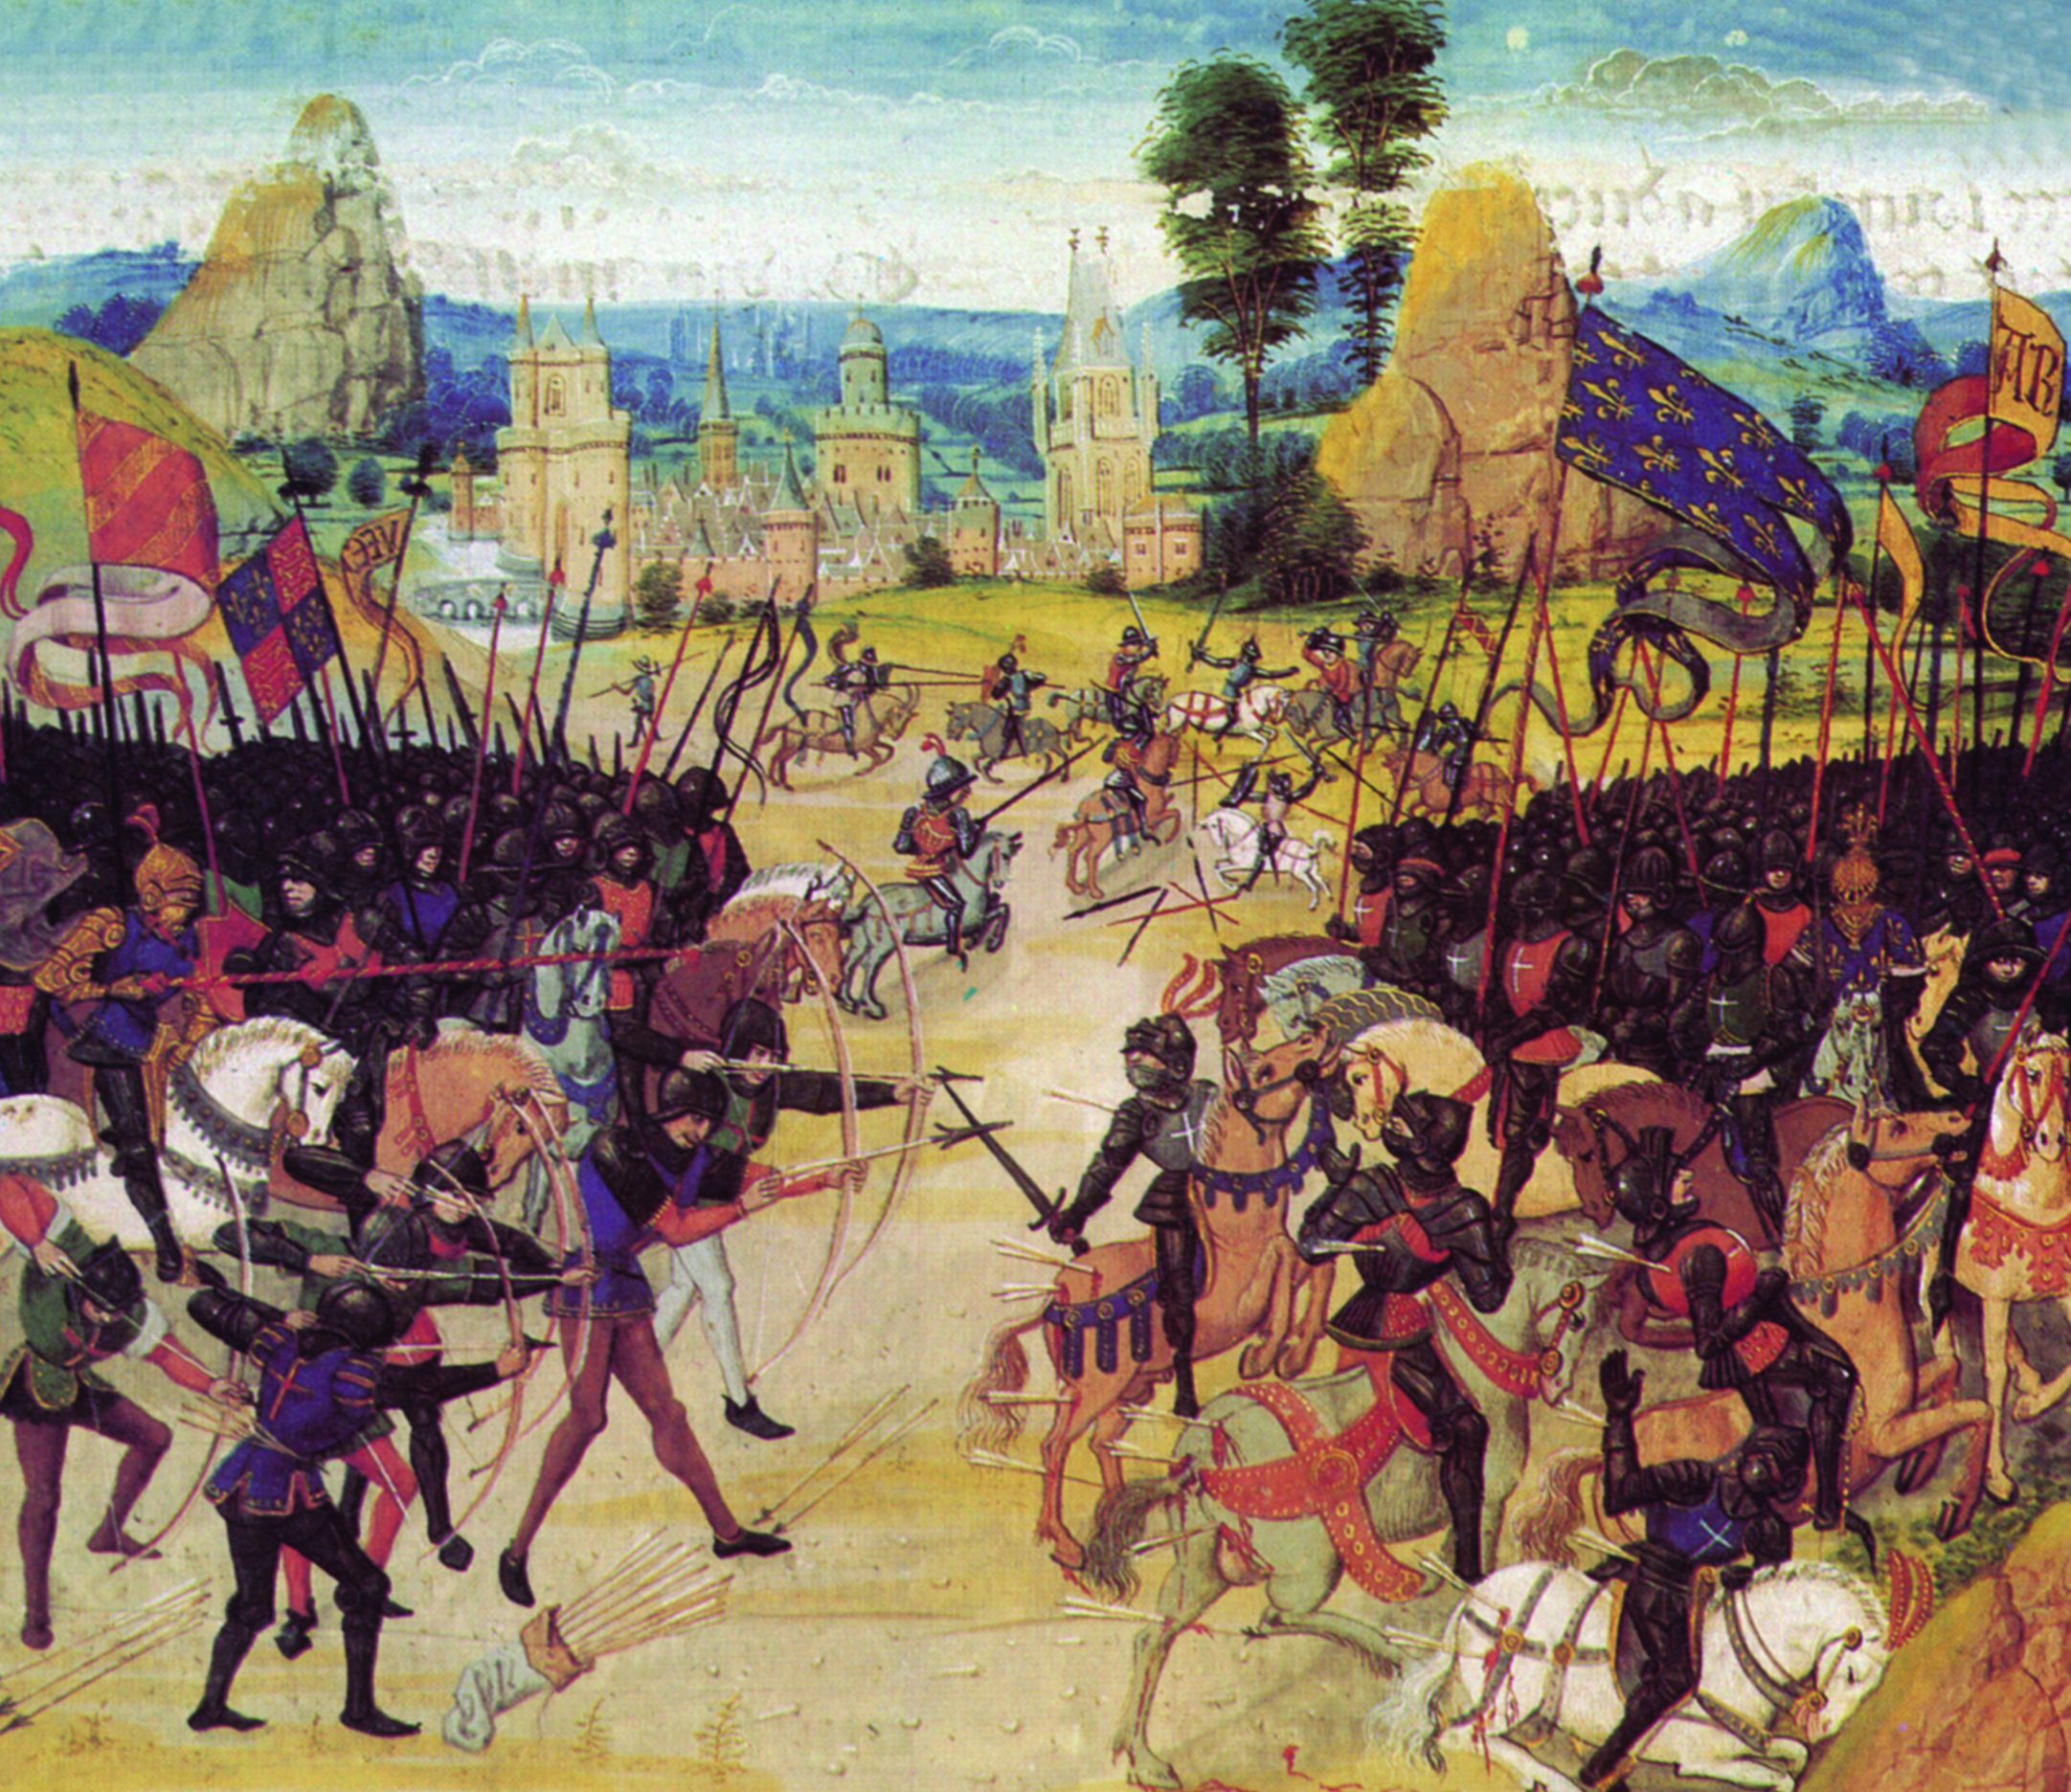 English bowmen devastated the flower of French chivalry at Poitiers, much as they would do half a century later at Agincourt. 